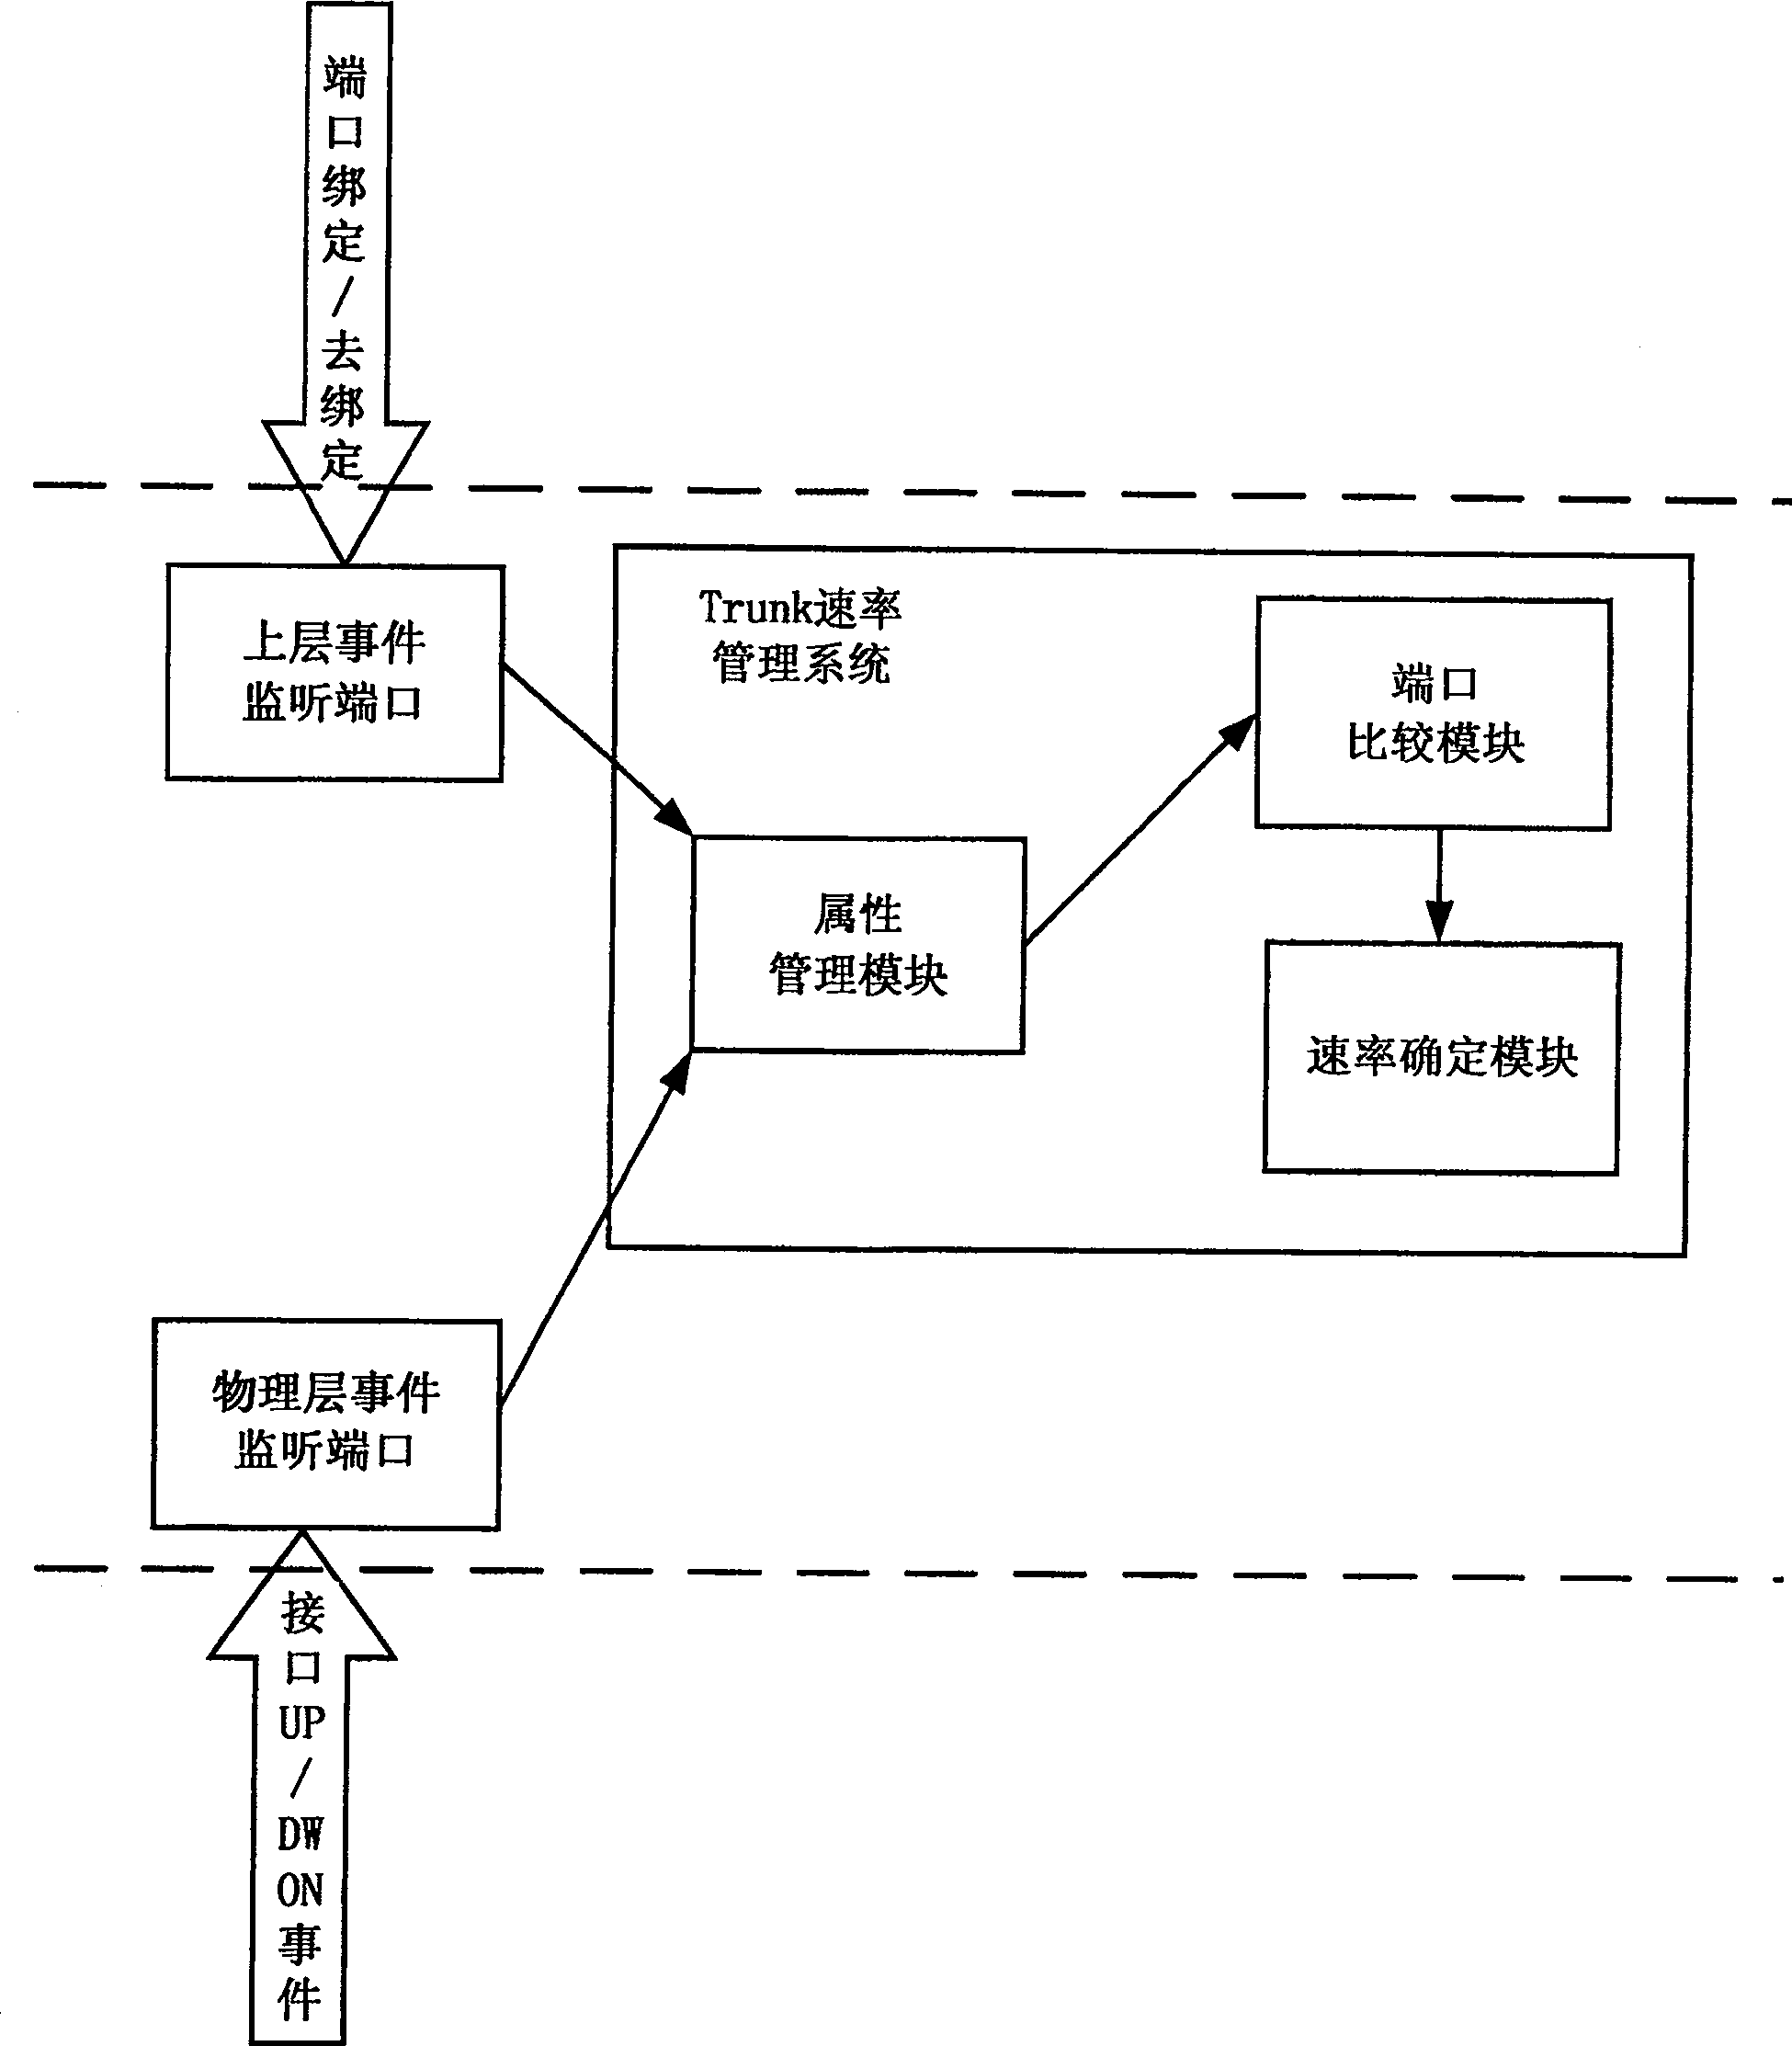 Port convergence rate management system and port convergence rate oscillation suppression method